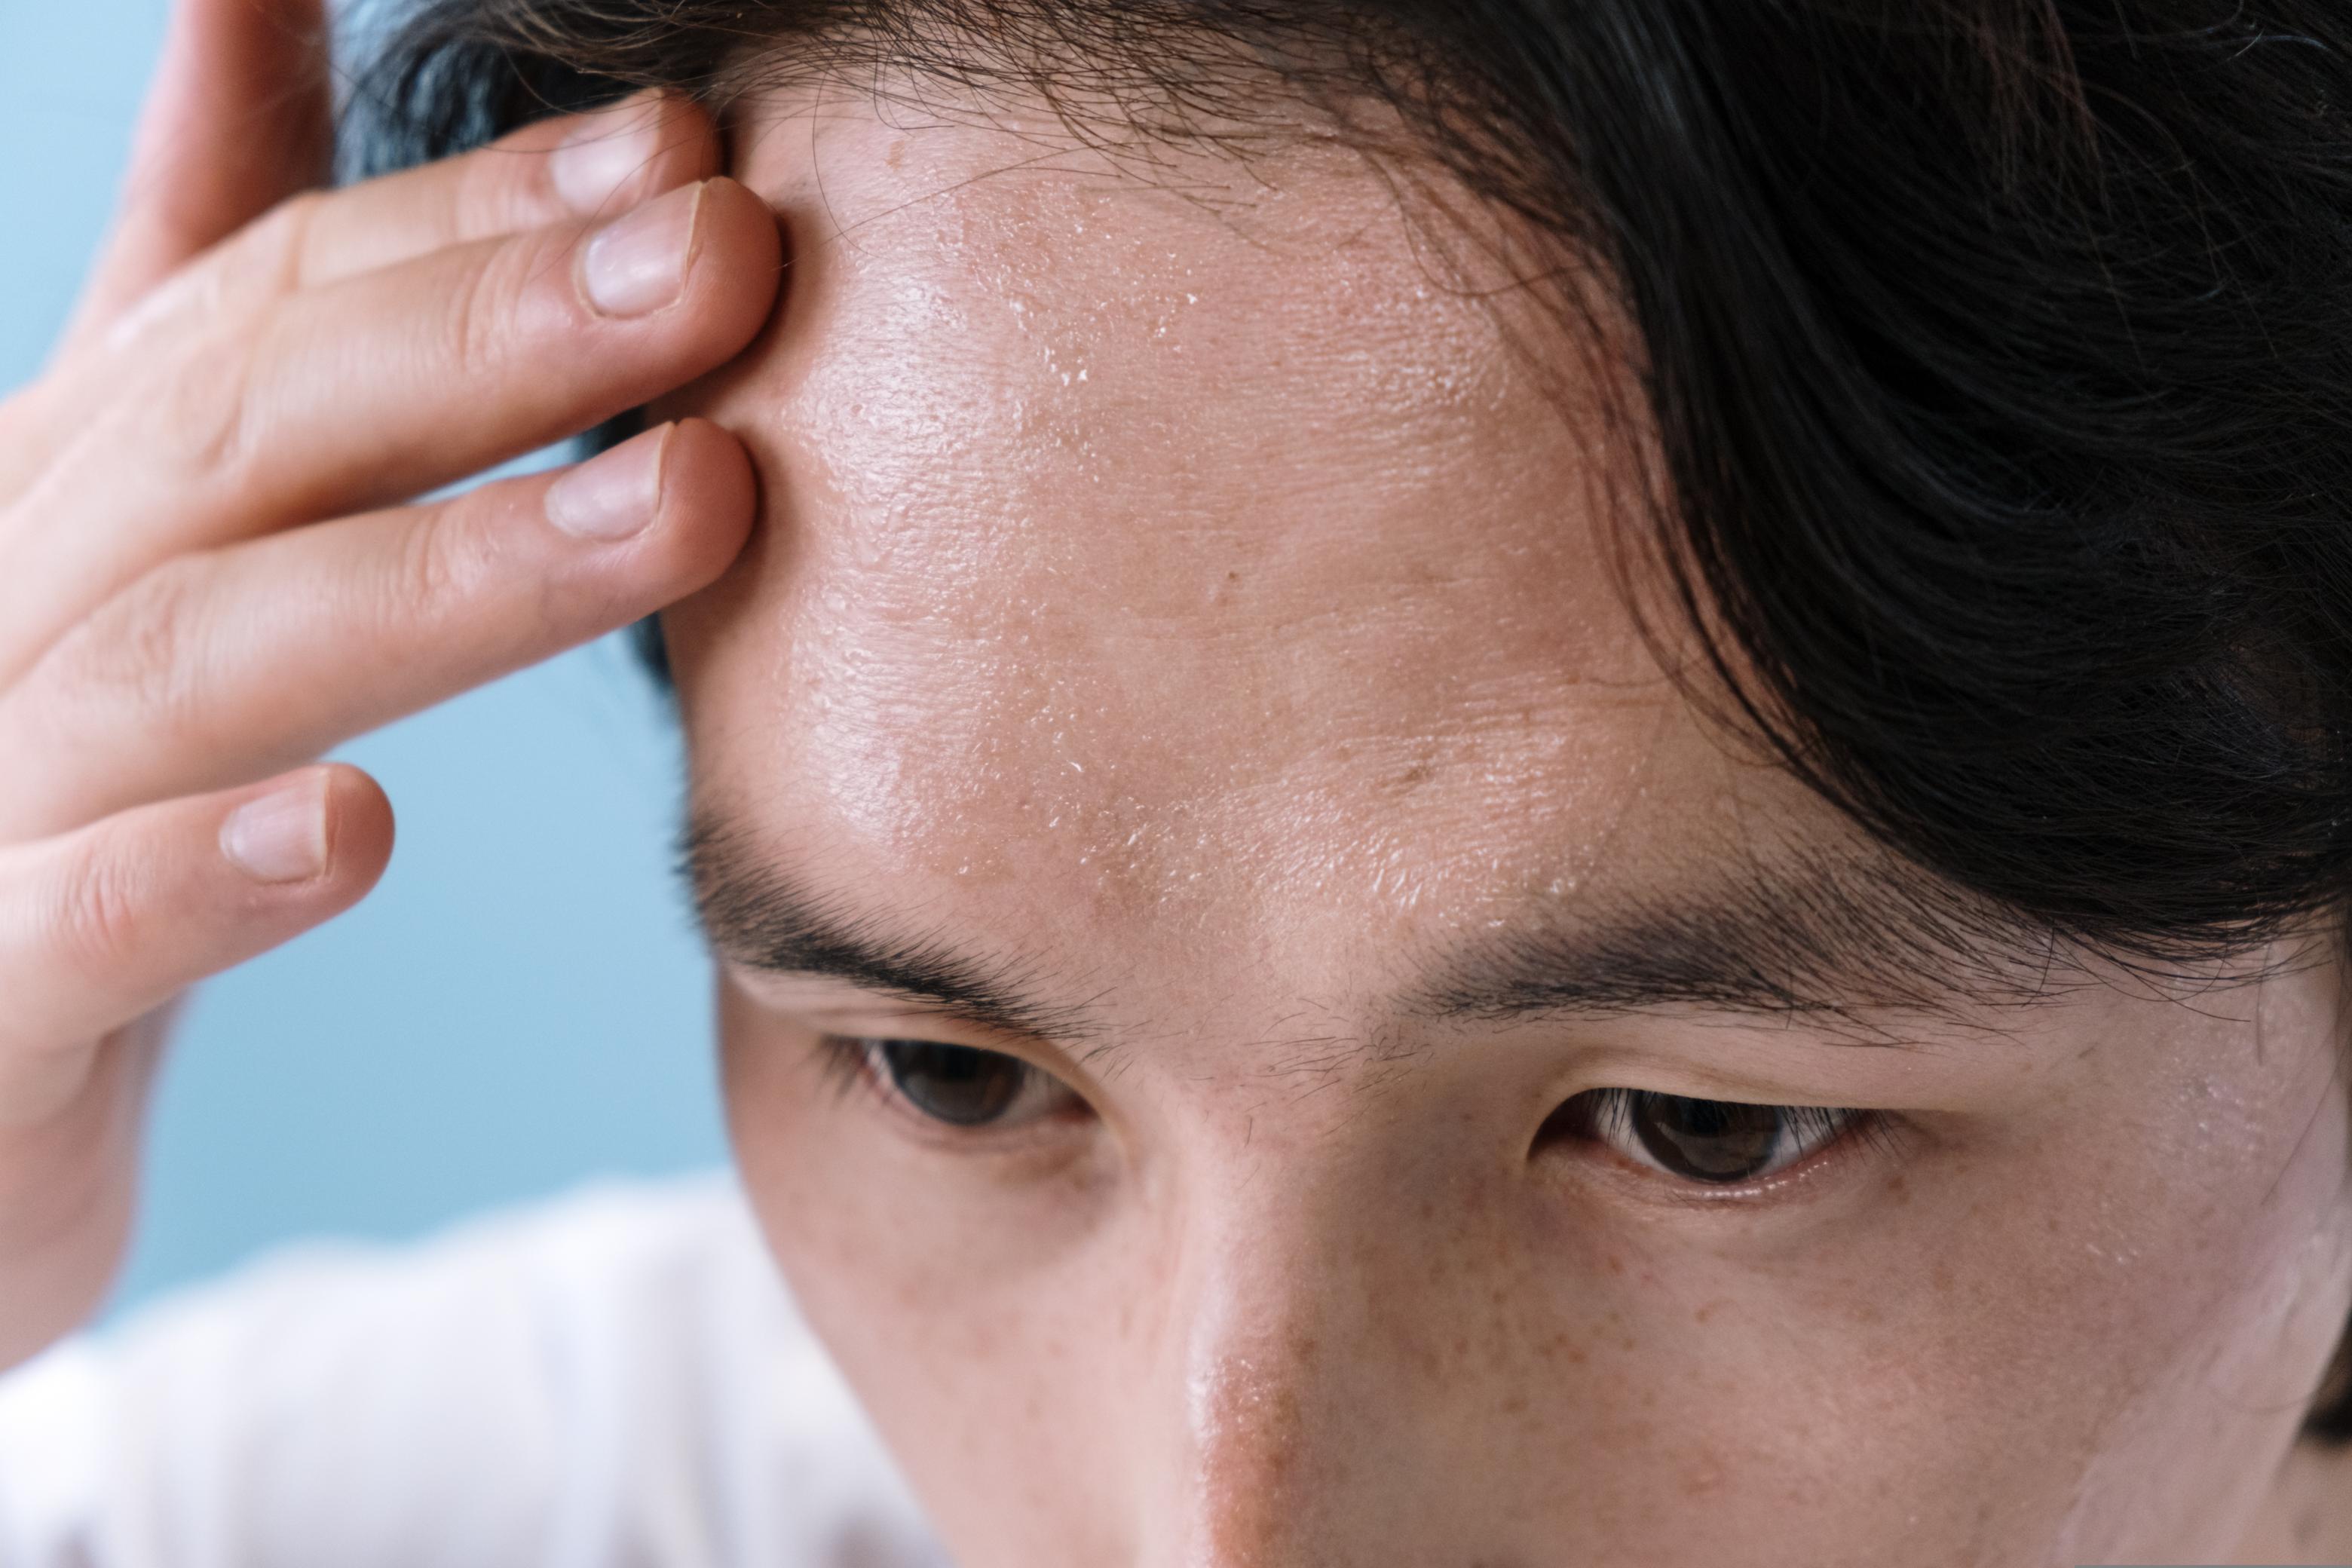 The symptoms of lice infestation